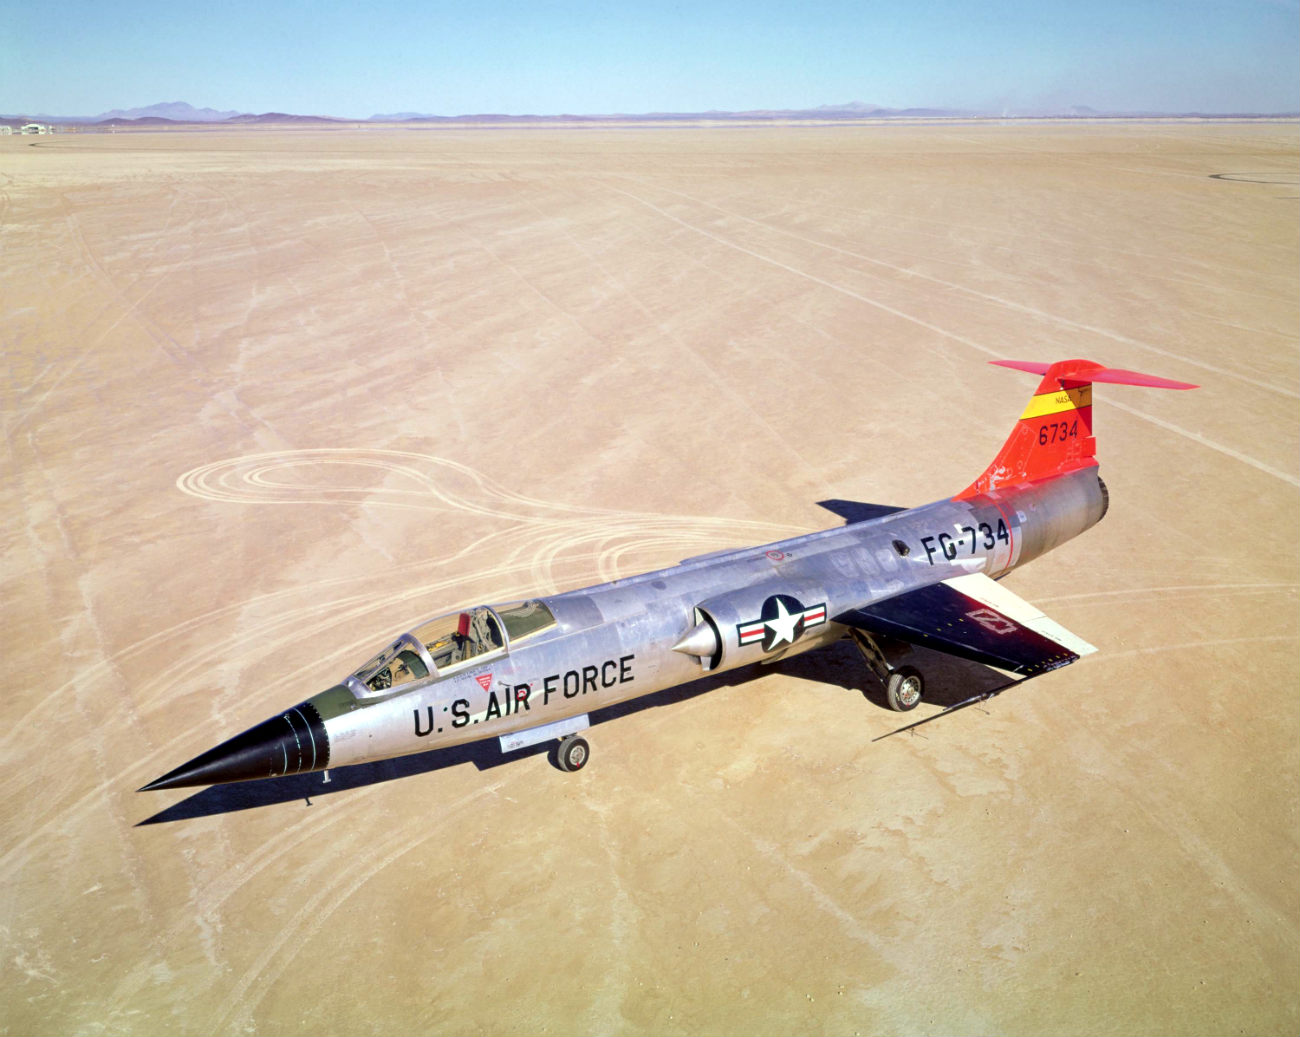 F-104 Starfighter on a lakebed